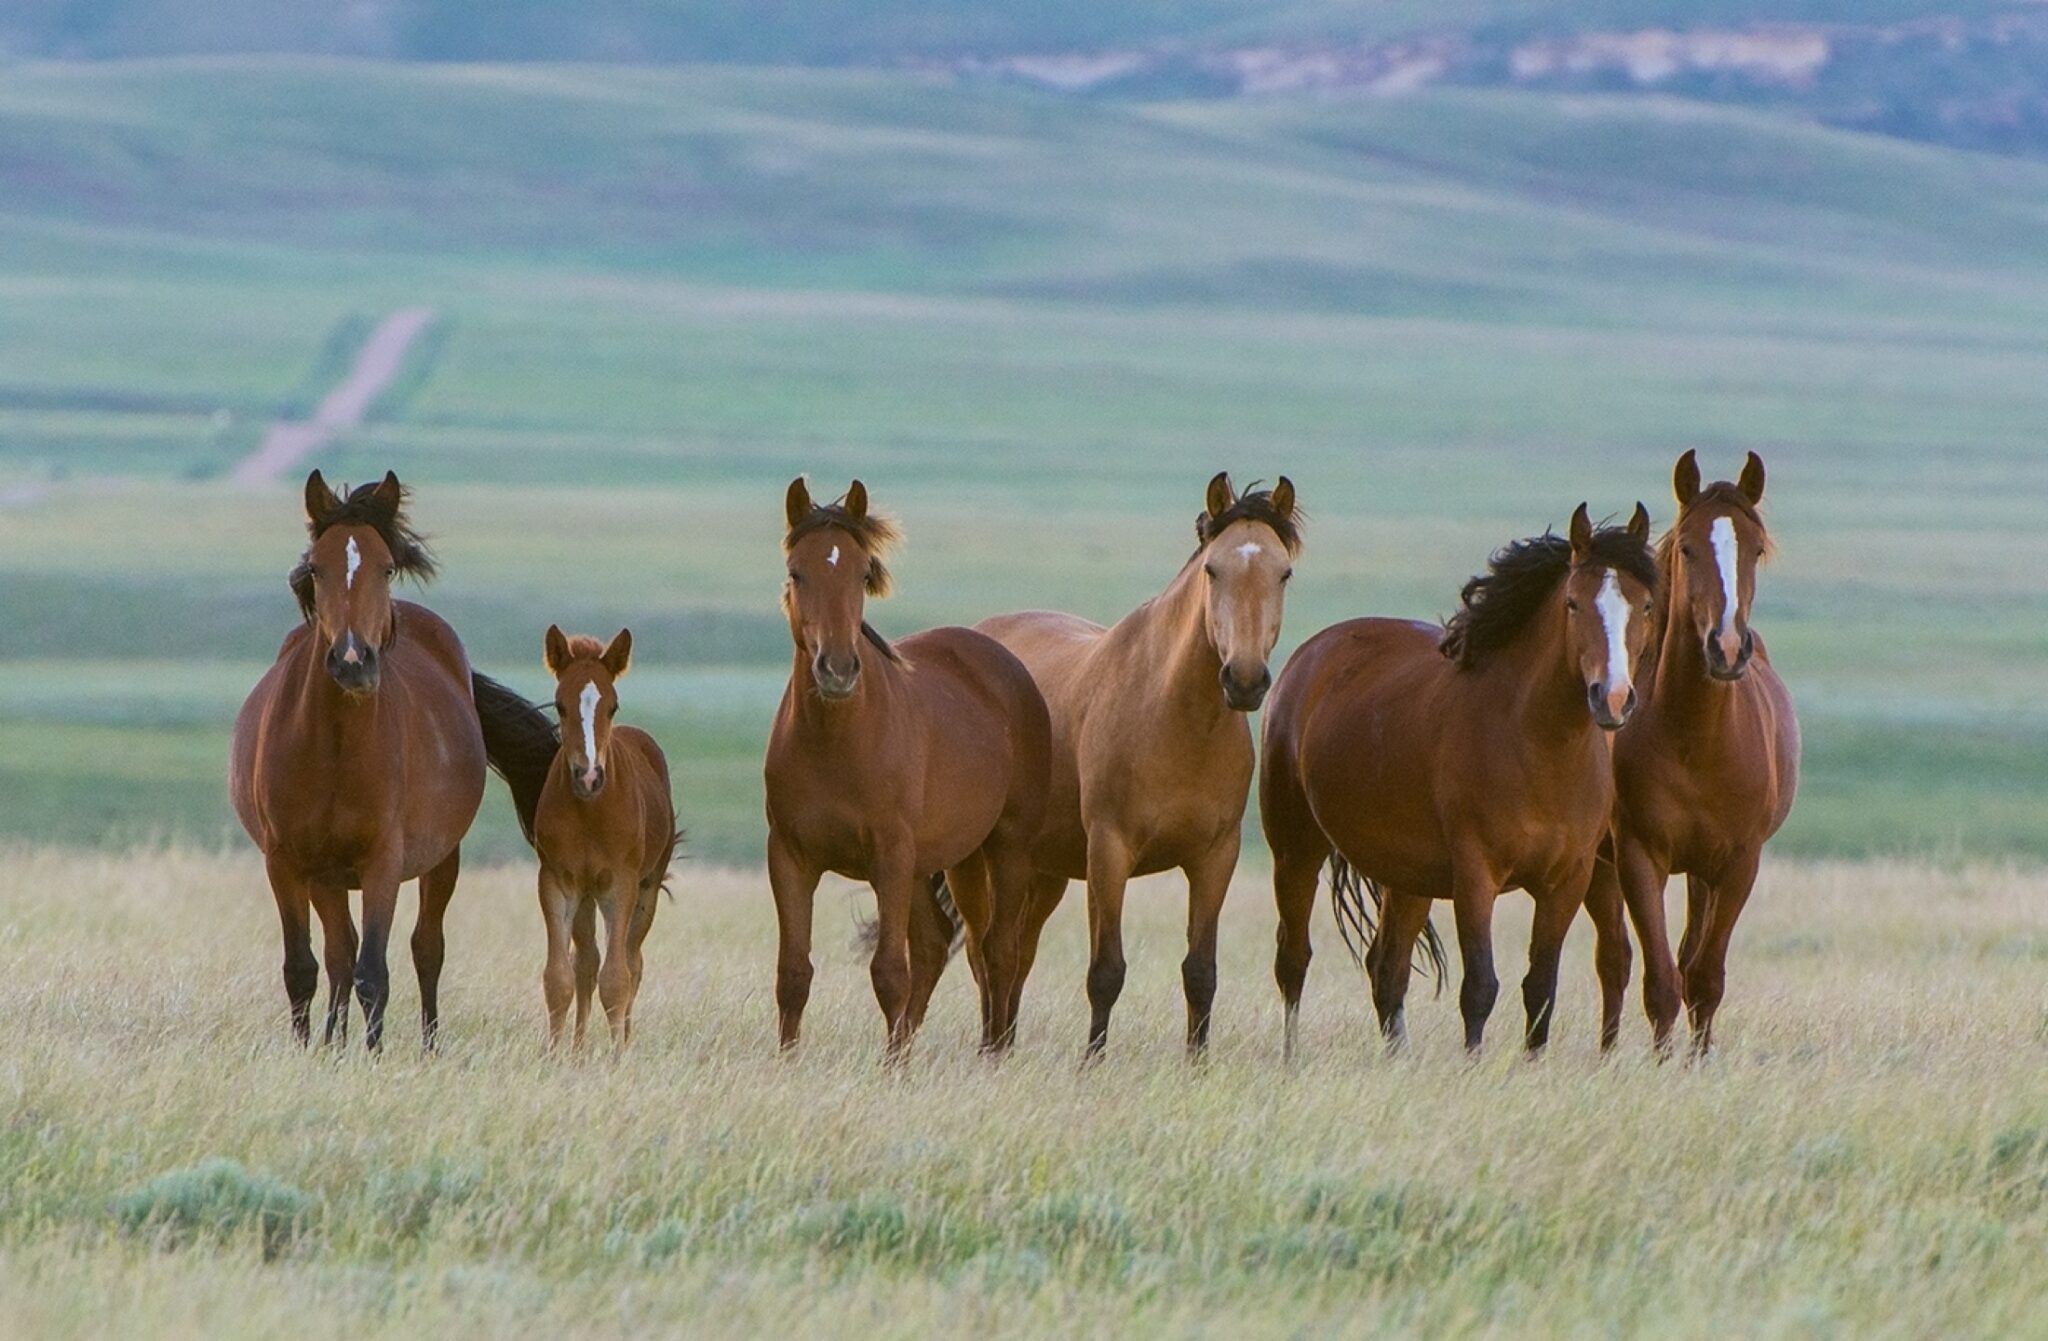 A group of wild horses in a field